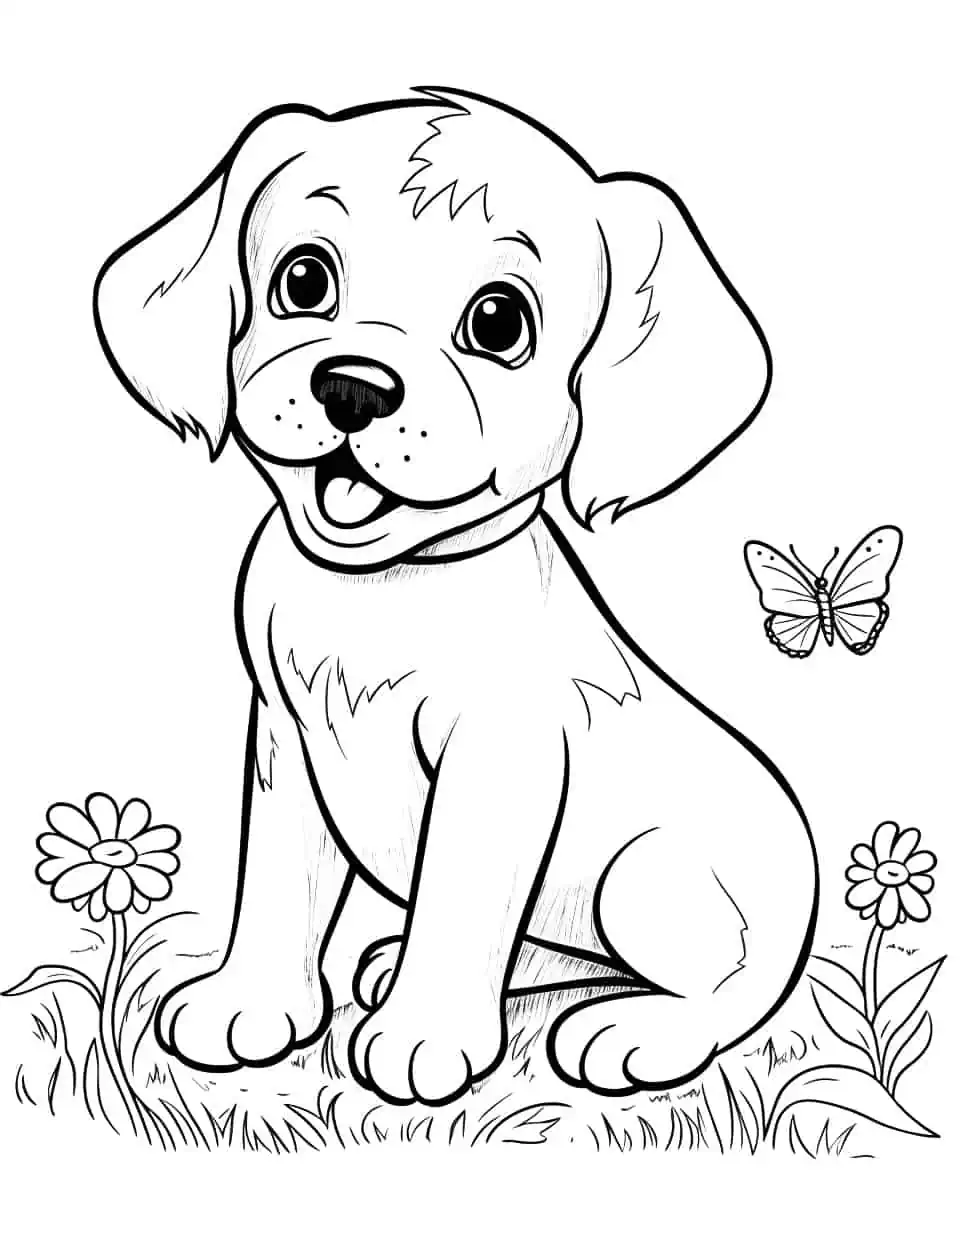 Puppy's Playdate Dog Coloring Page - A puppy playing with a butterfly in a field full of flowers.